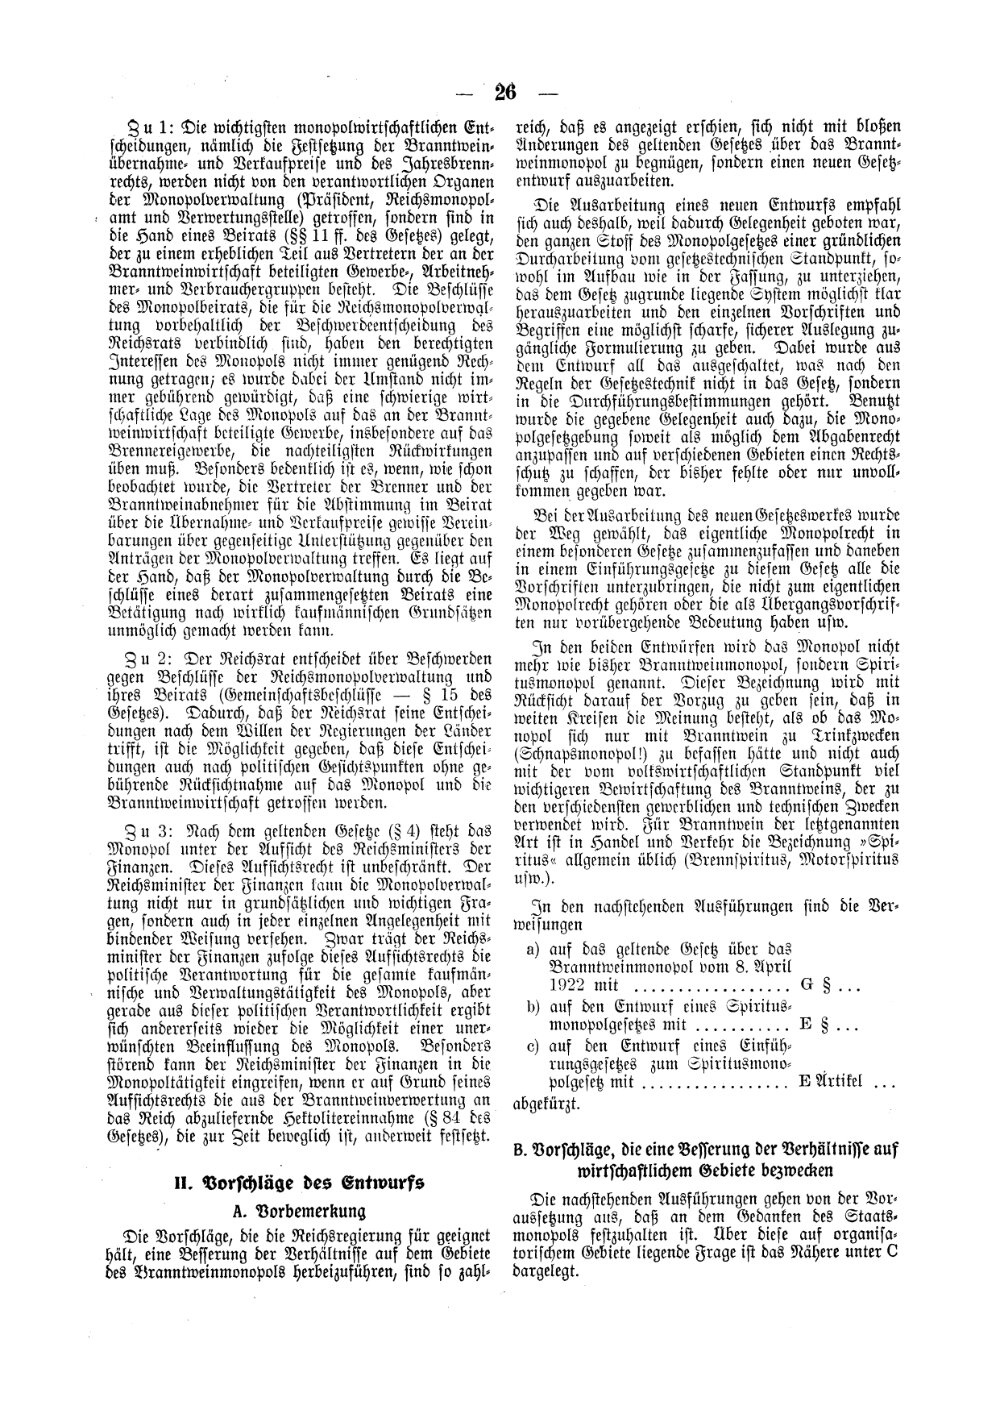 Scan of page 26